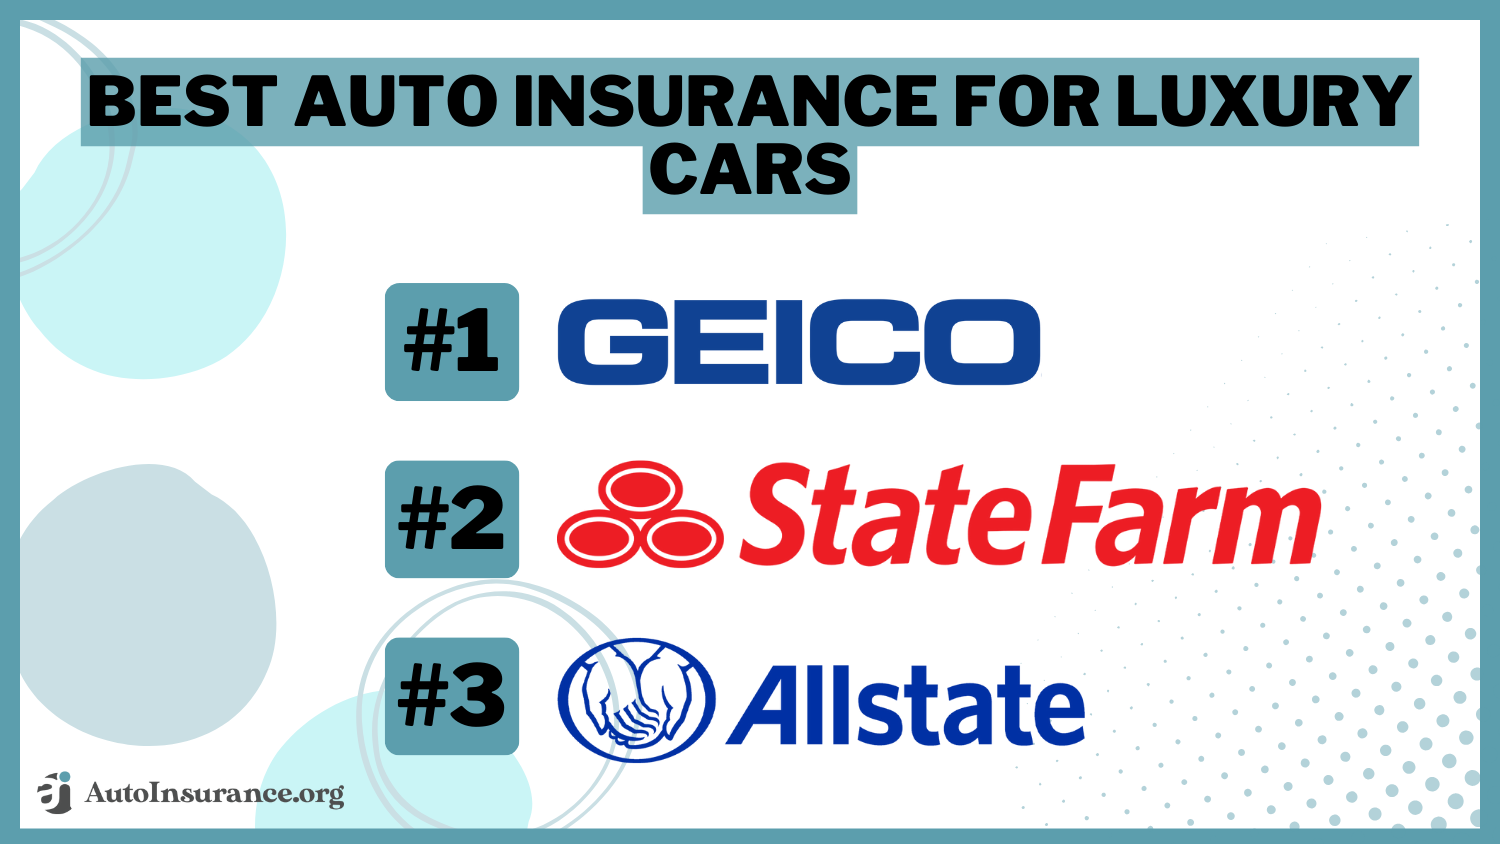 Best Auto Insurance for Luxury Cars: Geico, State Farm, Allstate